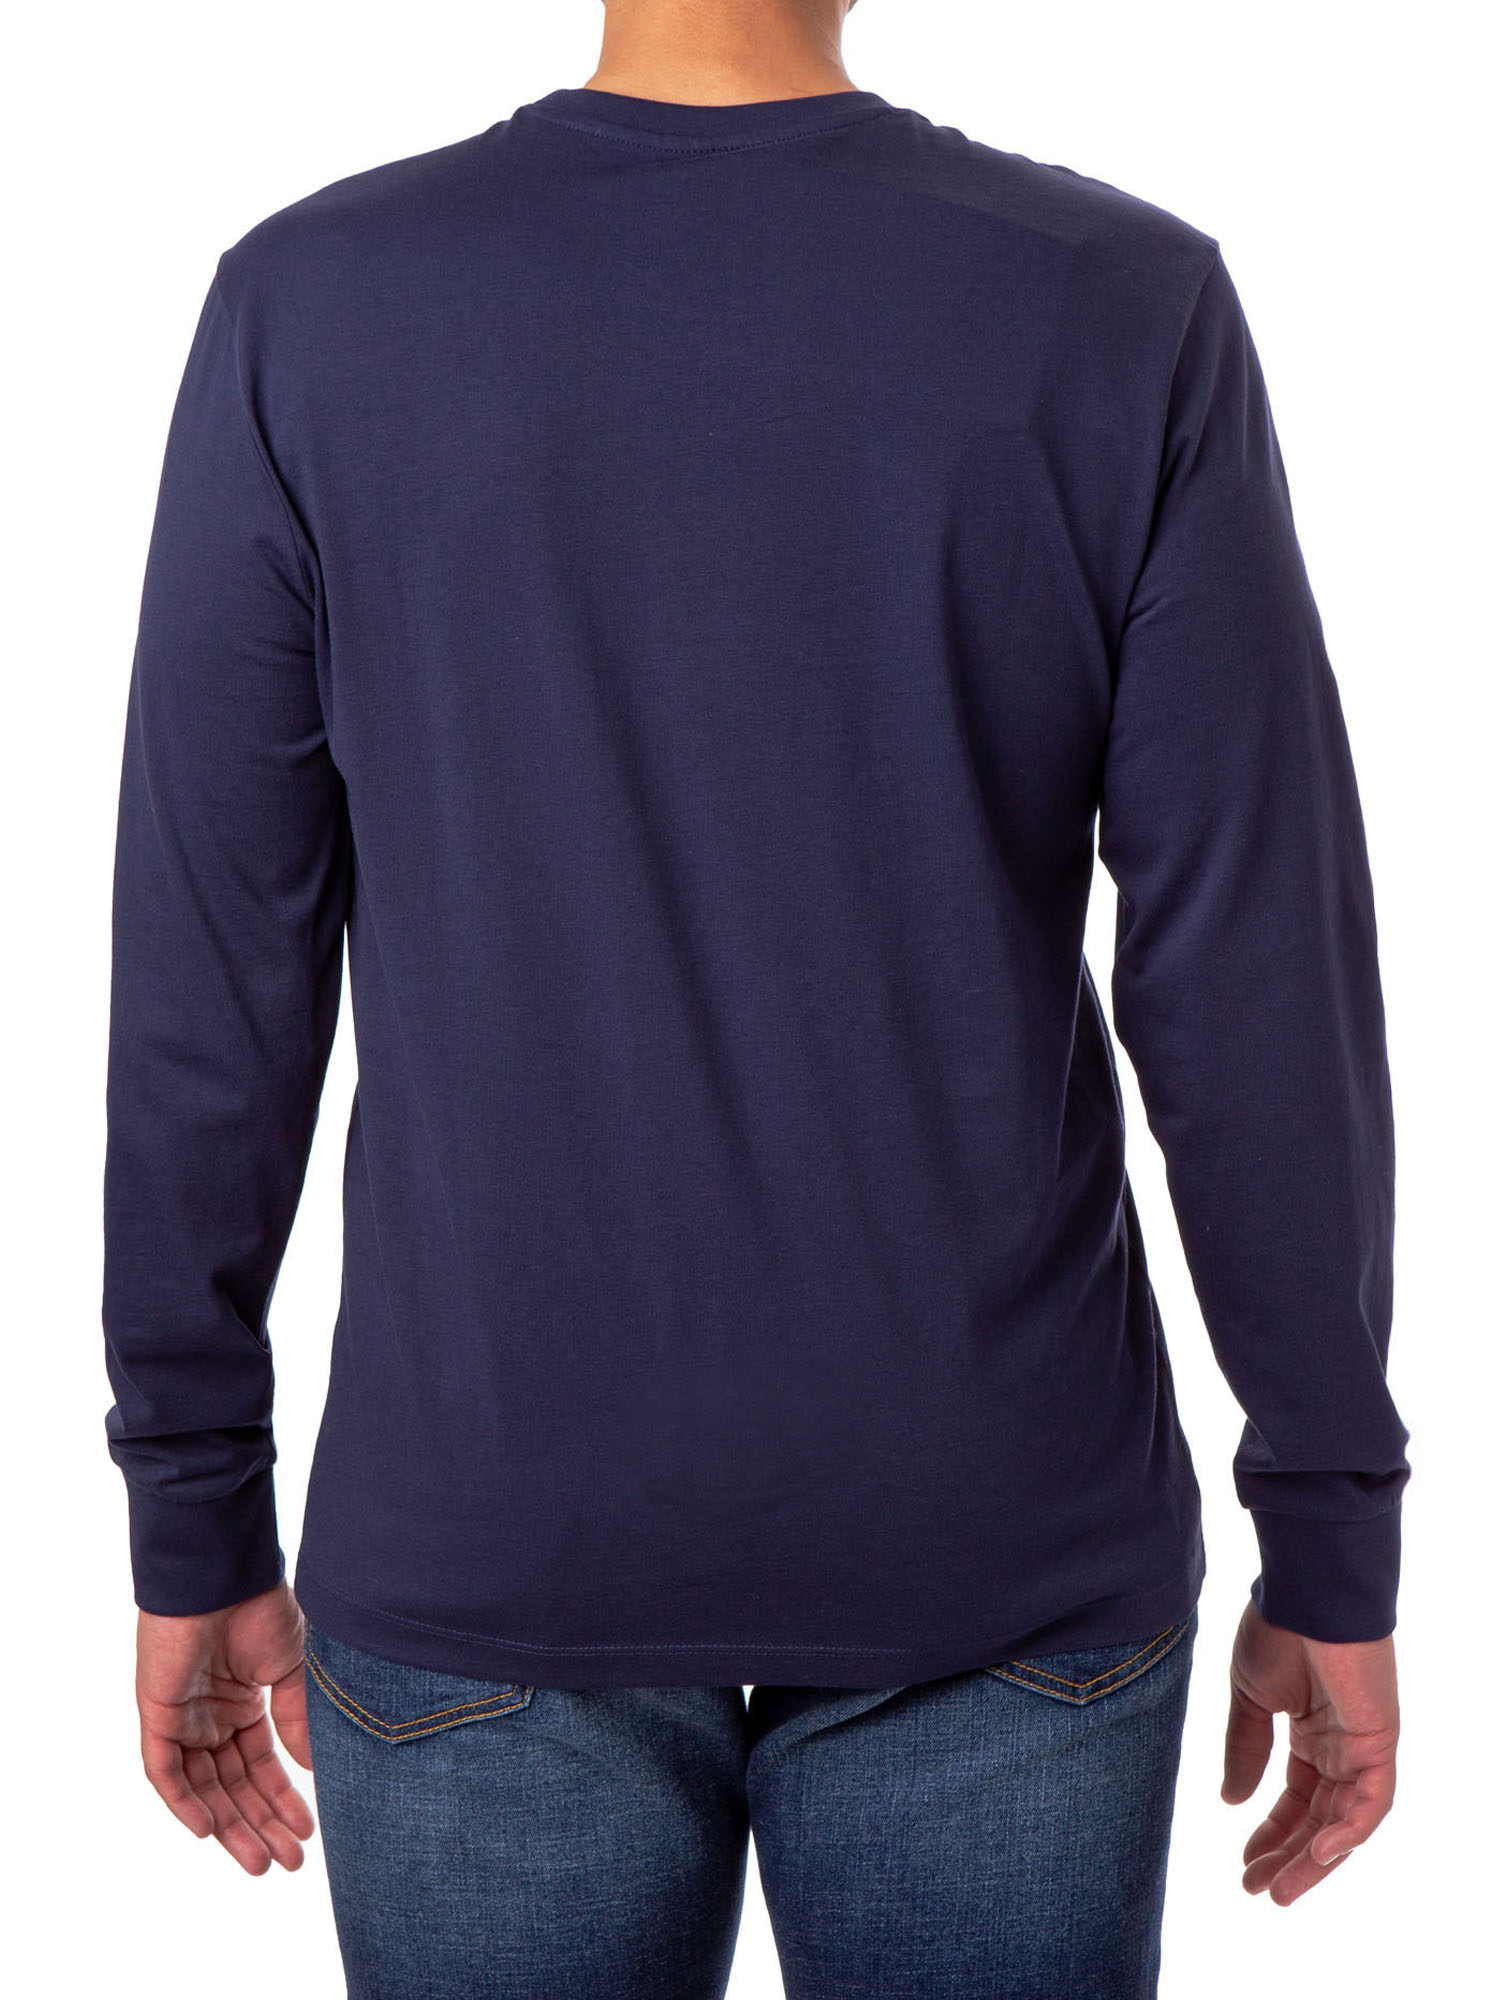 U.S. Polo Assn. Men's Long Sleeve Solid T-Shirt - image 2 of 3